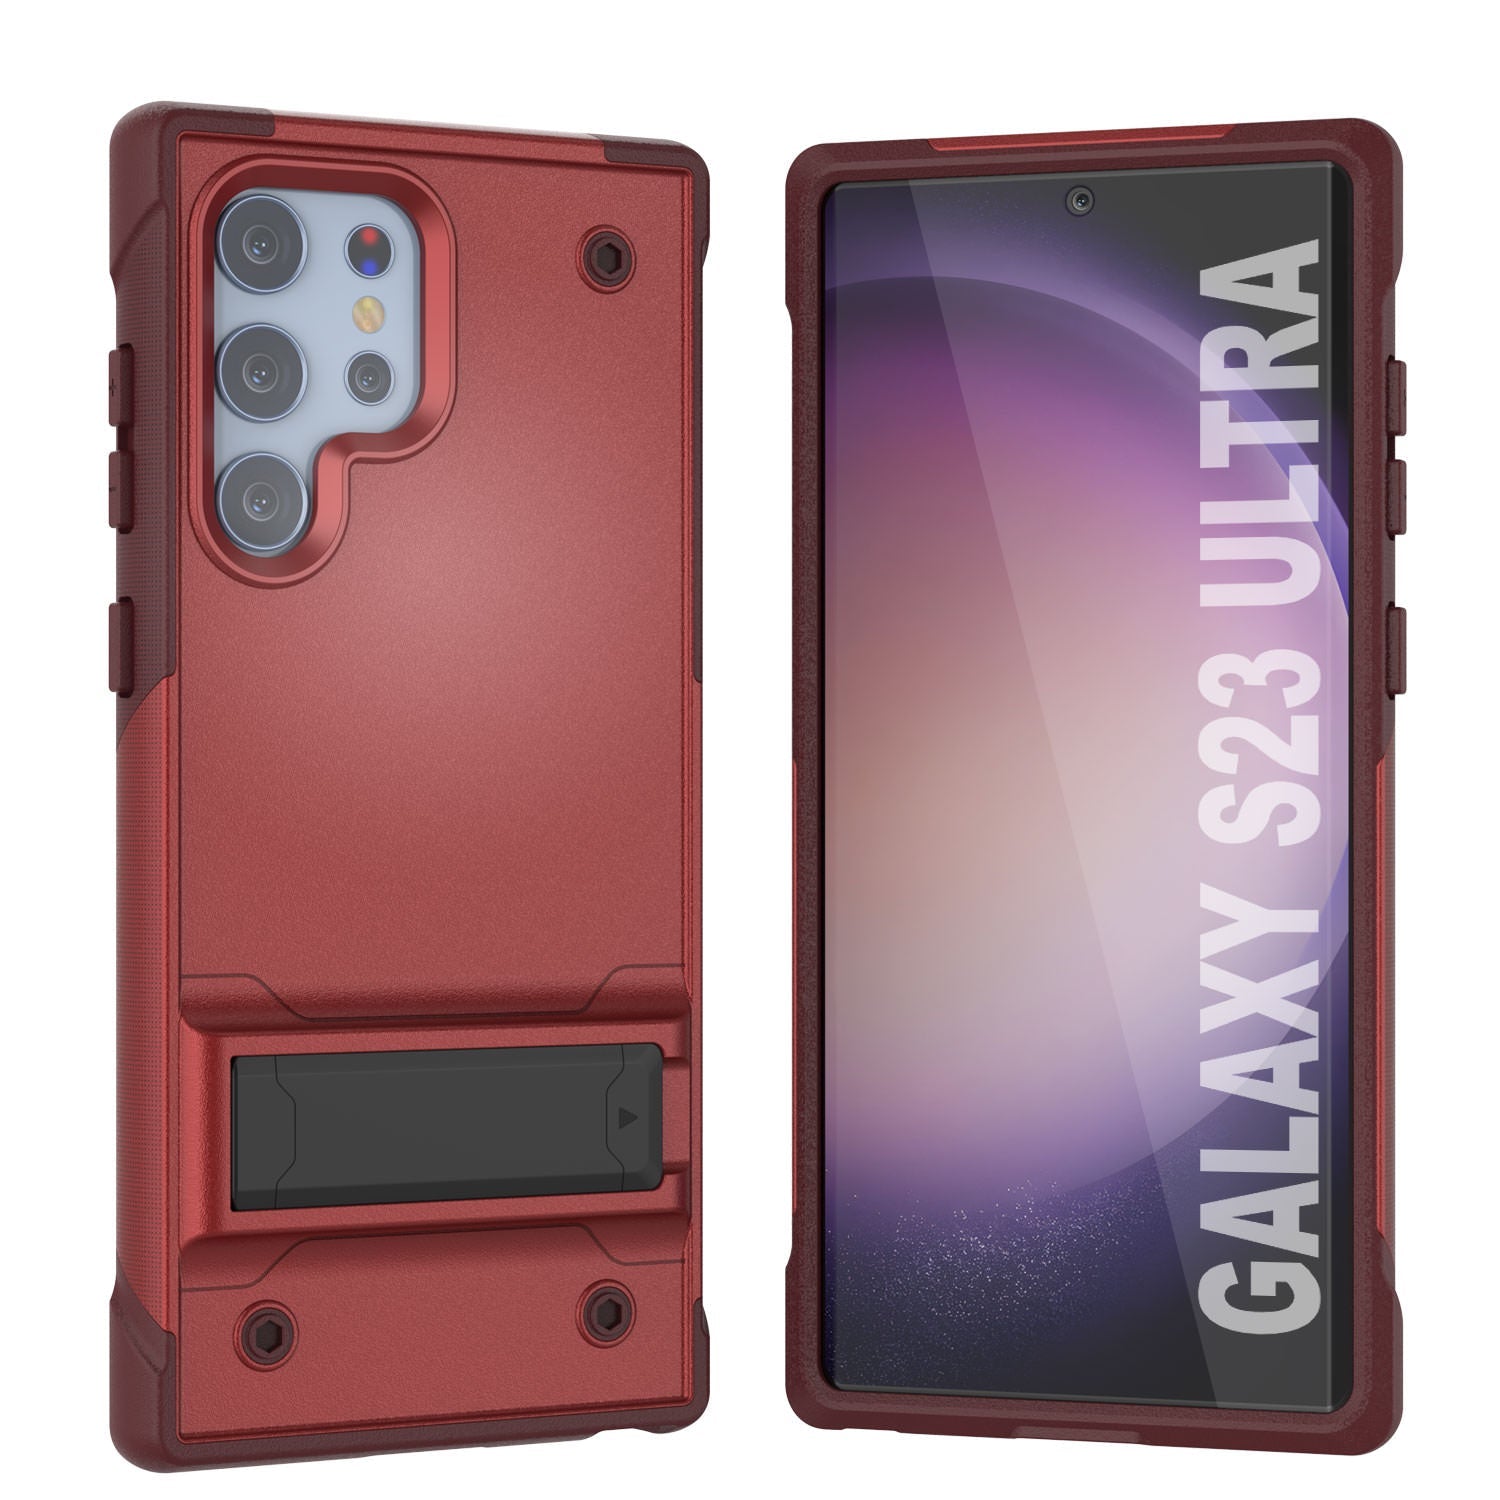 Punkcase Galaxy S24 Ultra Case [Reliance Series] Protective Hybrid Military Grade Cover W/Built-in Kickstand [Red-Rose]